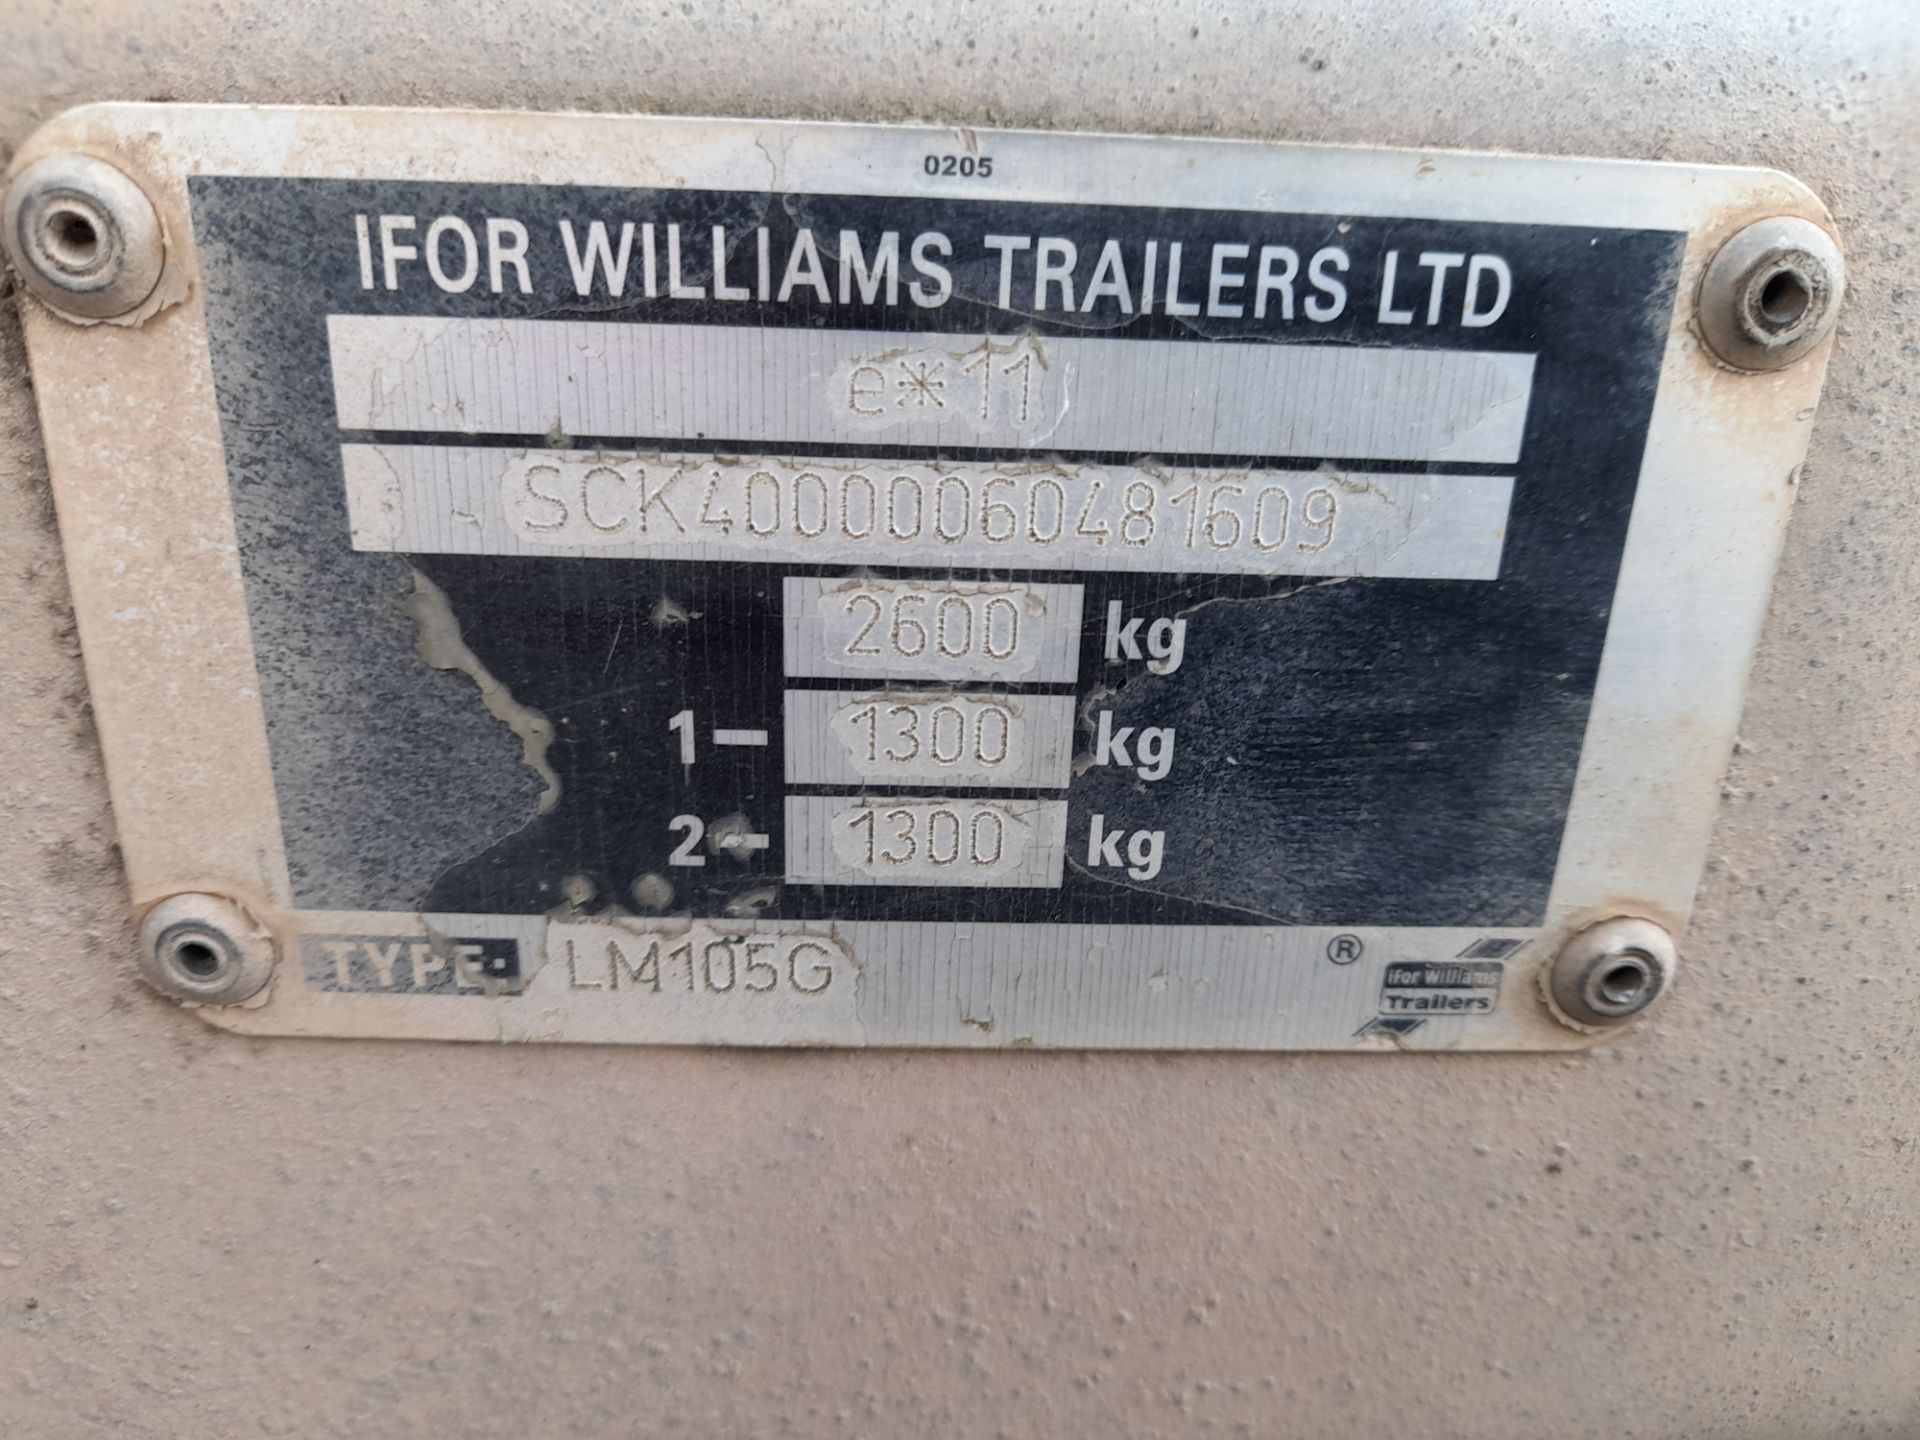 Ifor Williams e*11 SCK40000060481609 Type LM105G twin axle trailer (Approx. 10ft x 5ft) - Image 6 of 7